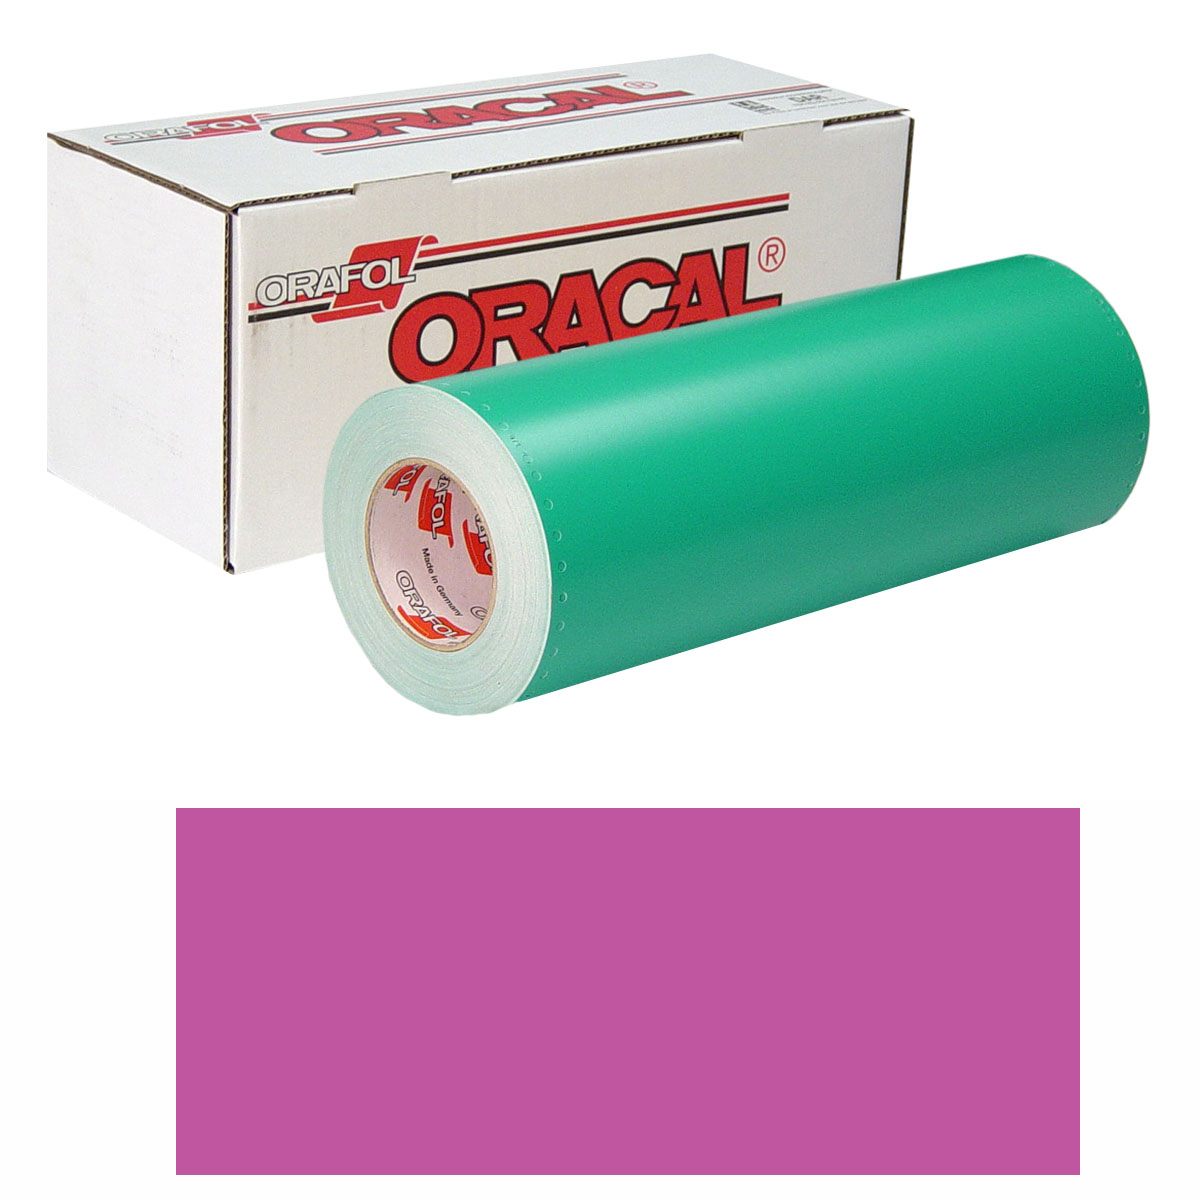 ORACAL 8500 30in X 50yd 413 Light Pink